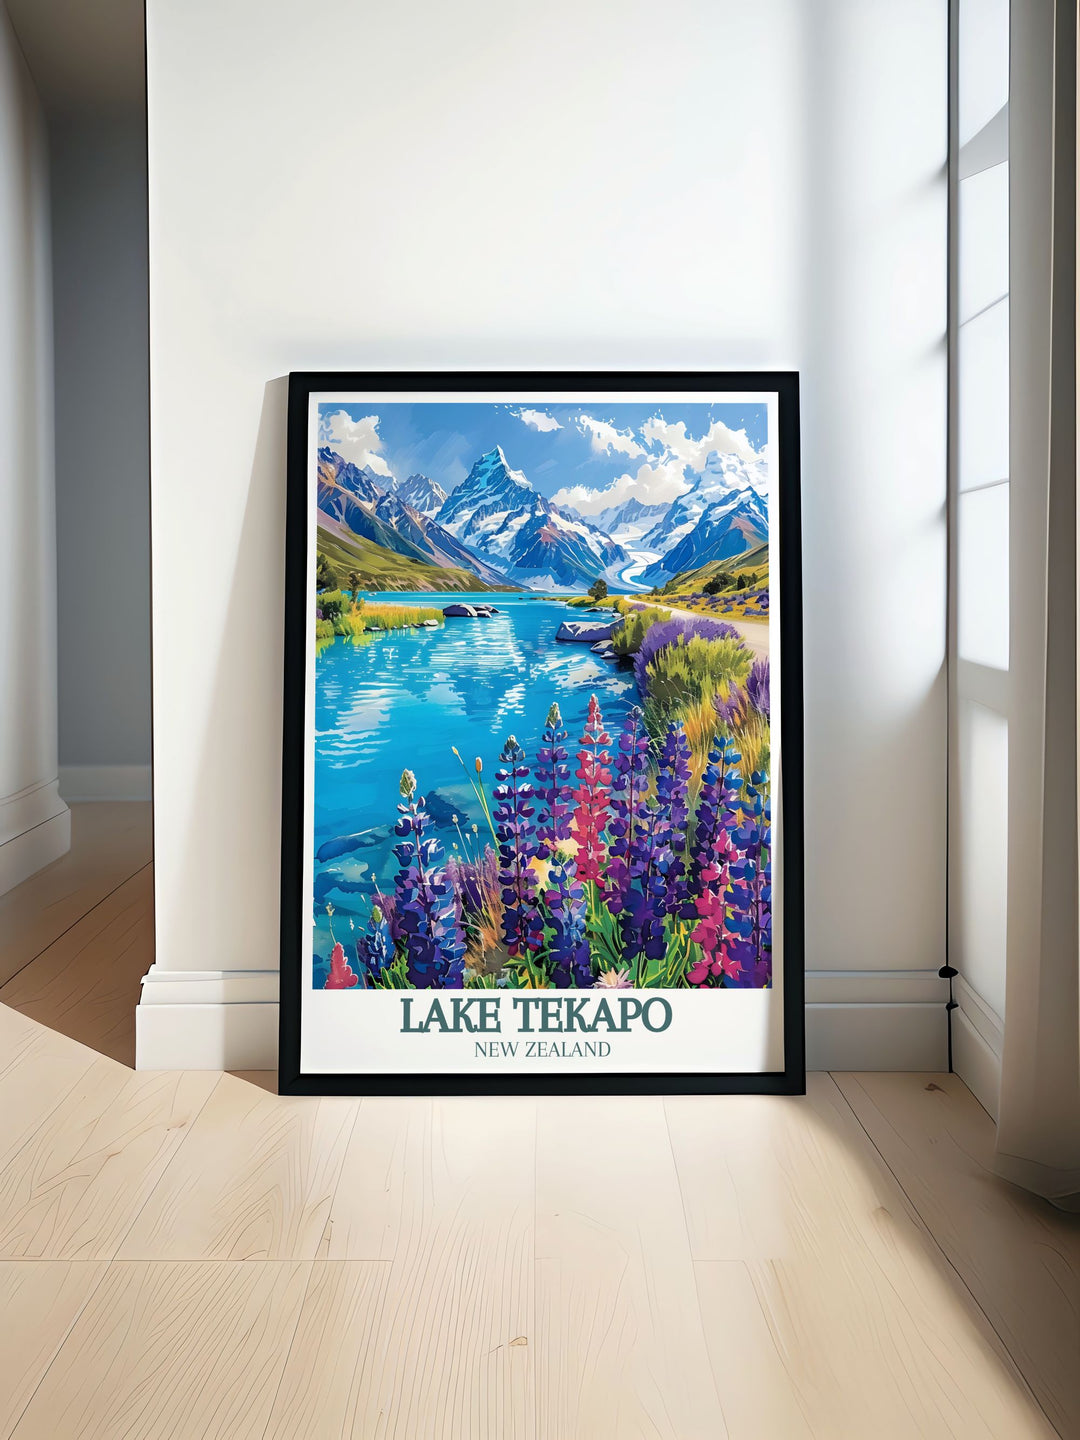 Celebrating the scenic trails and vibrant landscapes of the Southern Alps, this travel poster brings the dynamic spirit of these mountains into your living space. Ideal for those who love lively atmospheres and rich natural heritage.